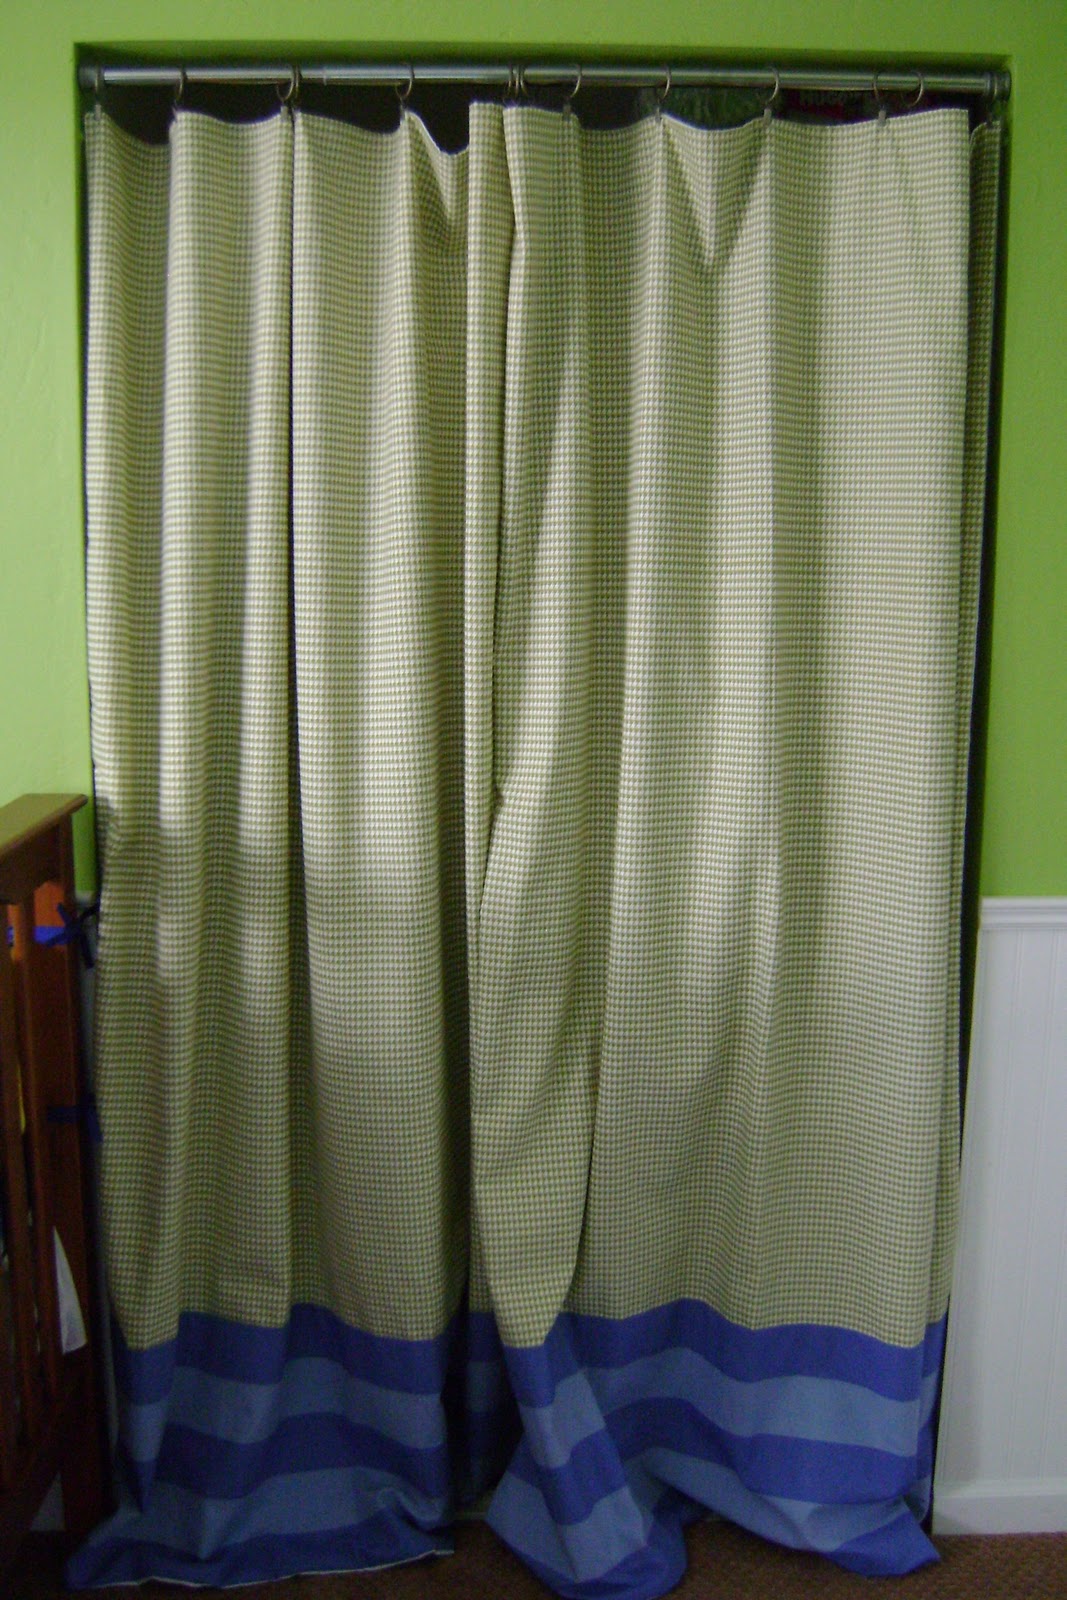 Design-Aholic: Two-Toned & Lined Curtains